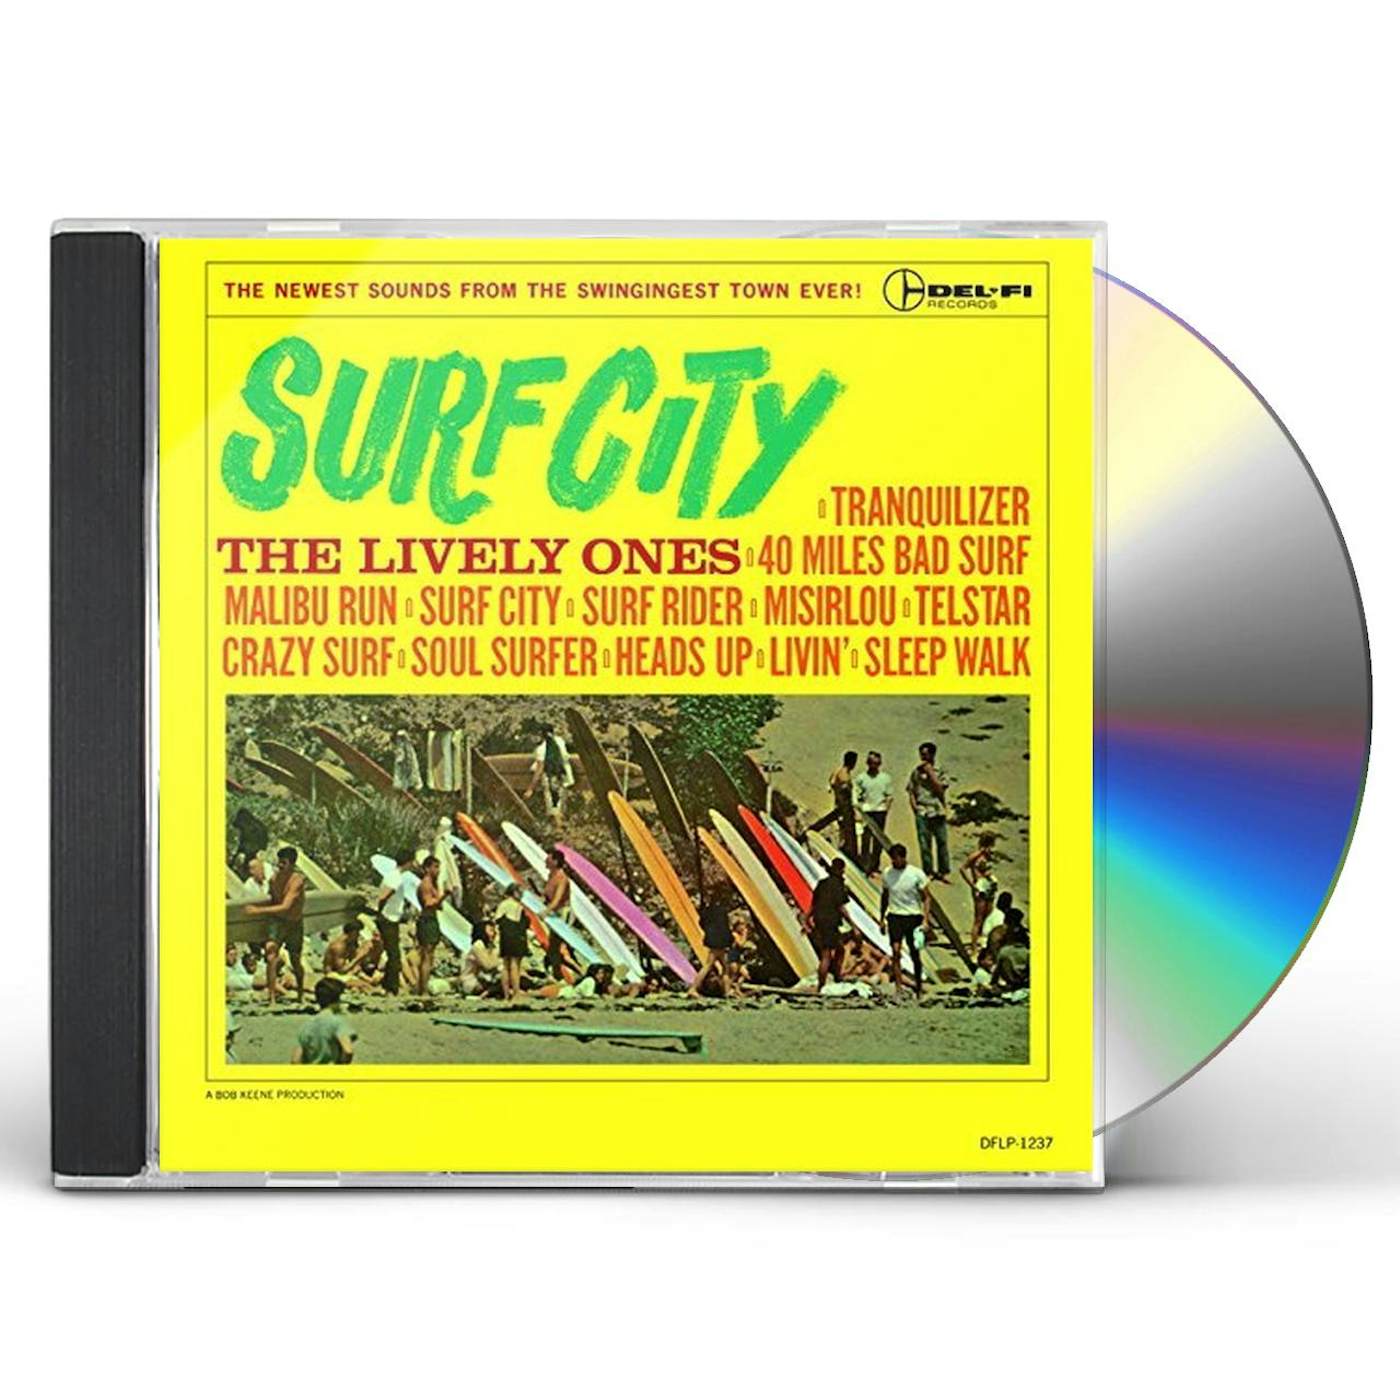 The Lively Ones SURF CITY CD